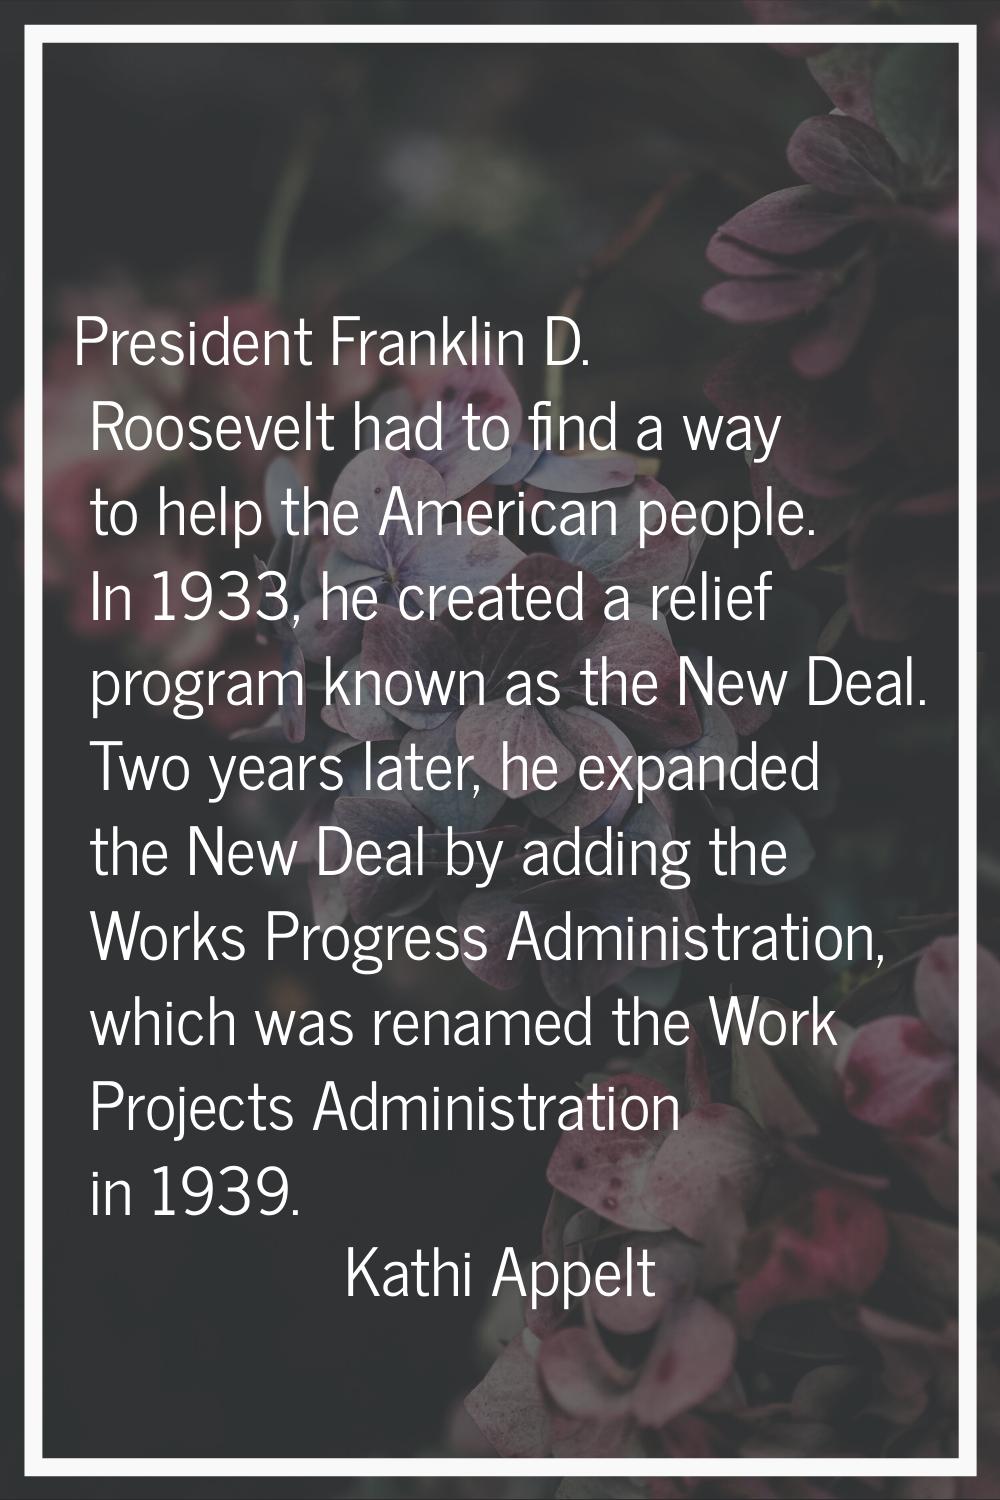 President Franklin D. Roosevelt had to find a way to help the American people. In 1933, he created 